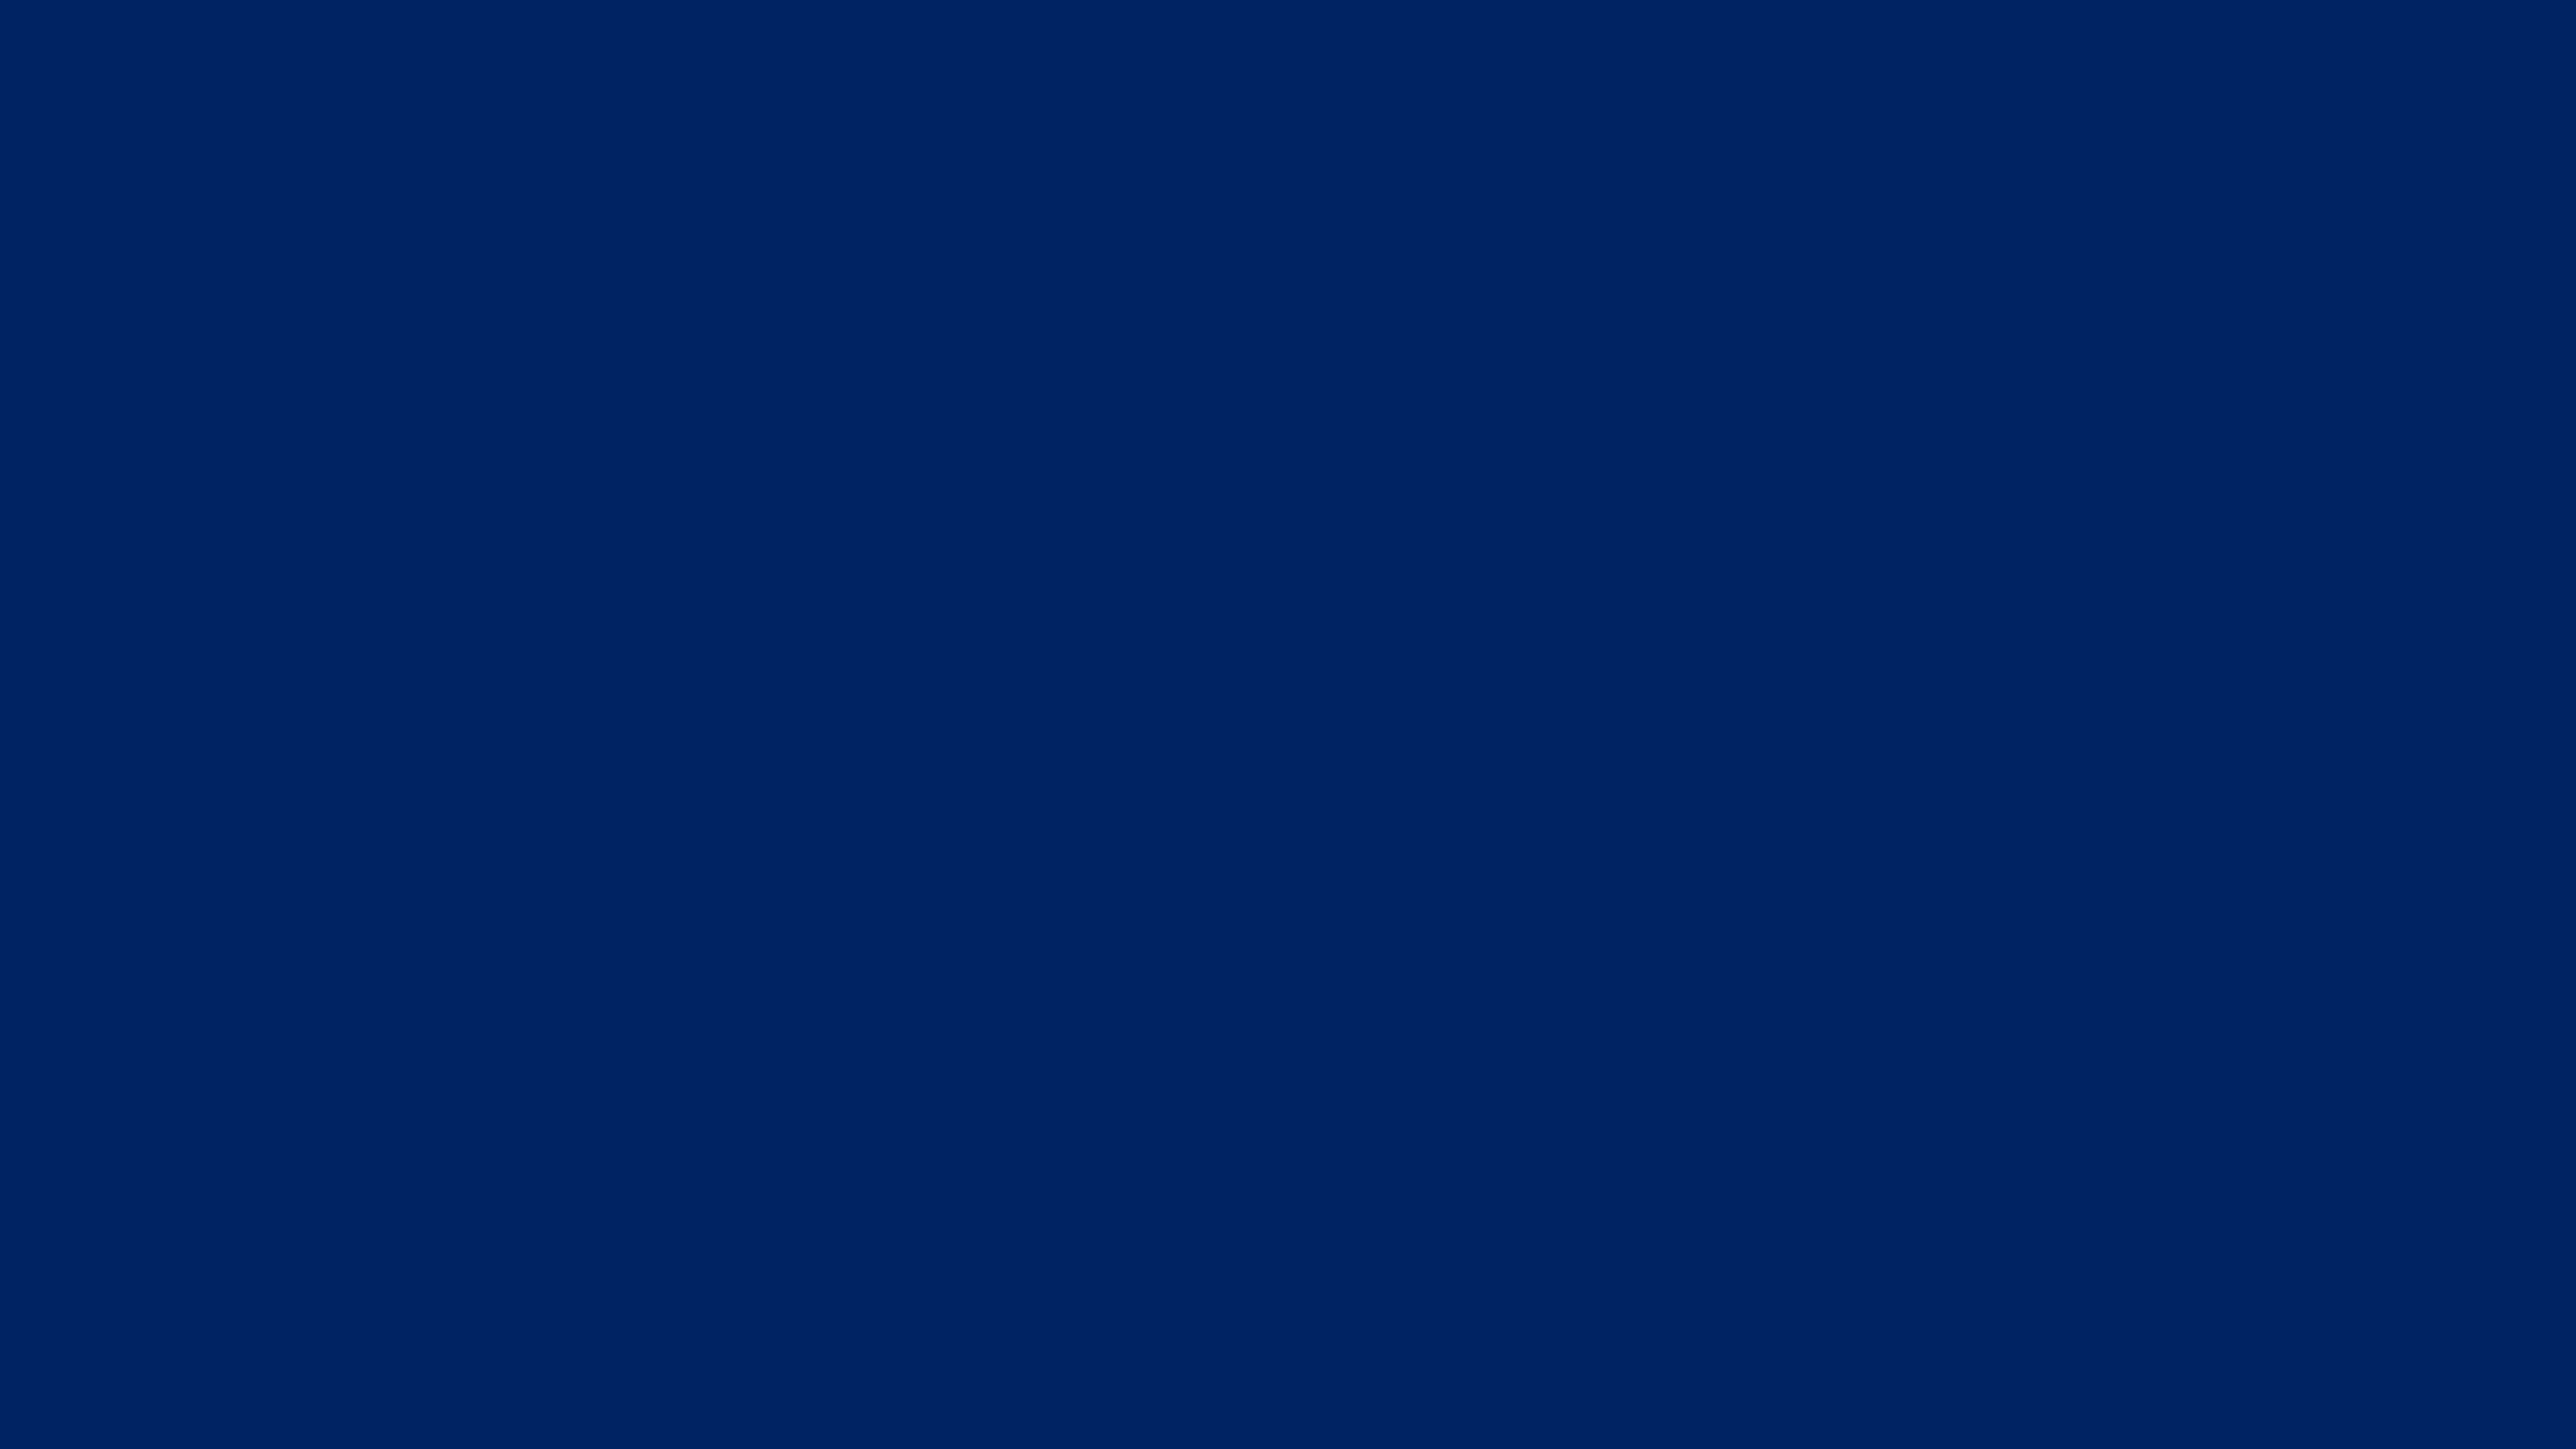 7680x4320 Royal Blue Traditional Solid Color Background